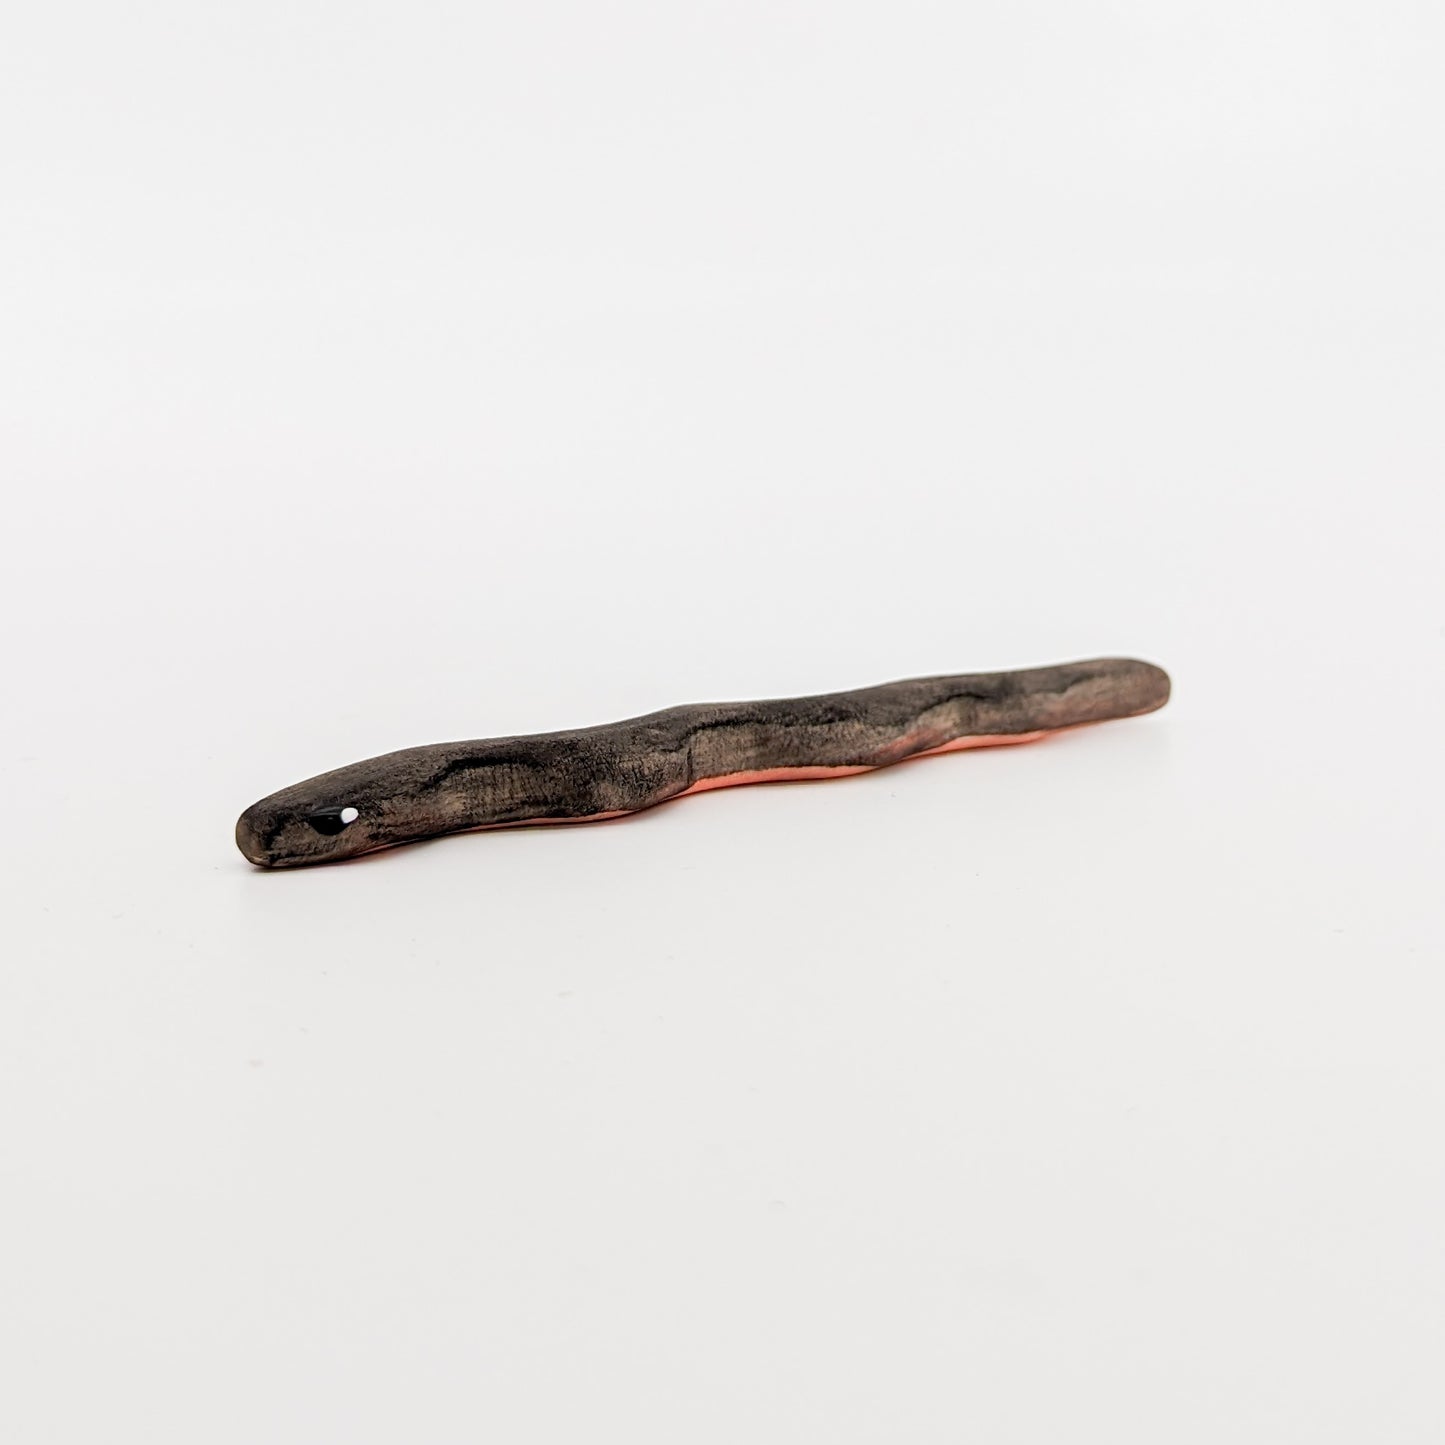 Snake Wooden Toy - Red Belly Black, Green Tree, Eastern Brown Snakes